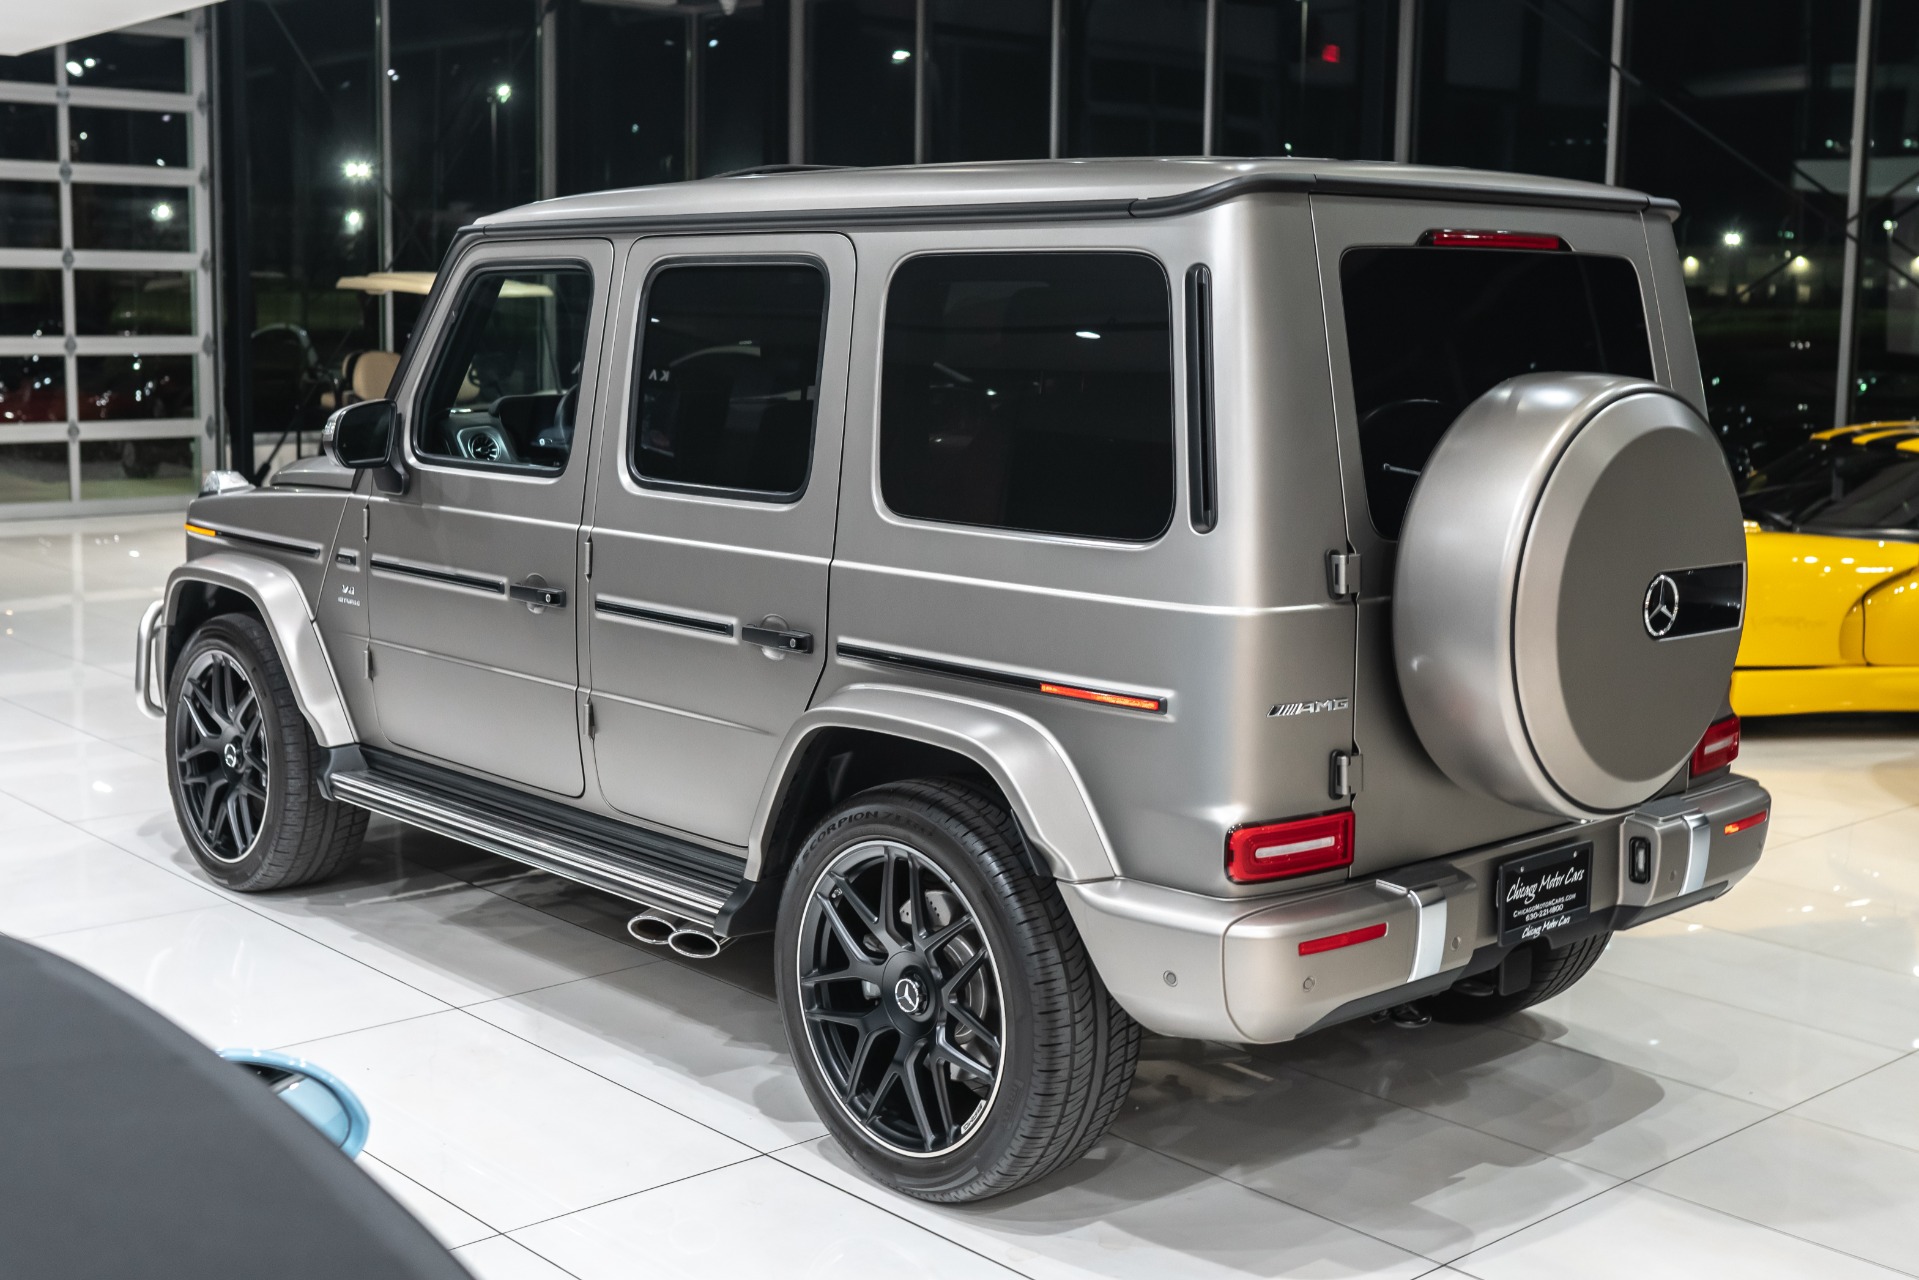 Used-2021-Mercedes-Benz-G63-AMG-4WD-SUV-Manufaktur-Magno-Paint-Exclusive-Interior-22inch-Wheels-PPF